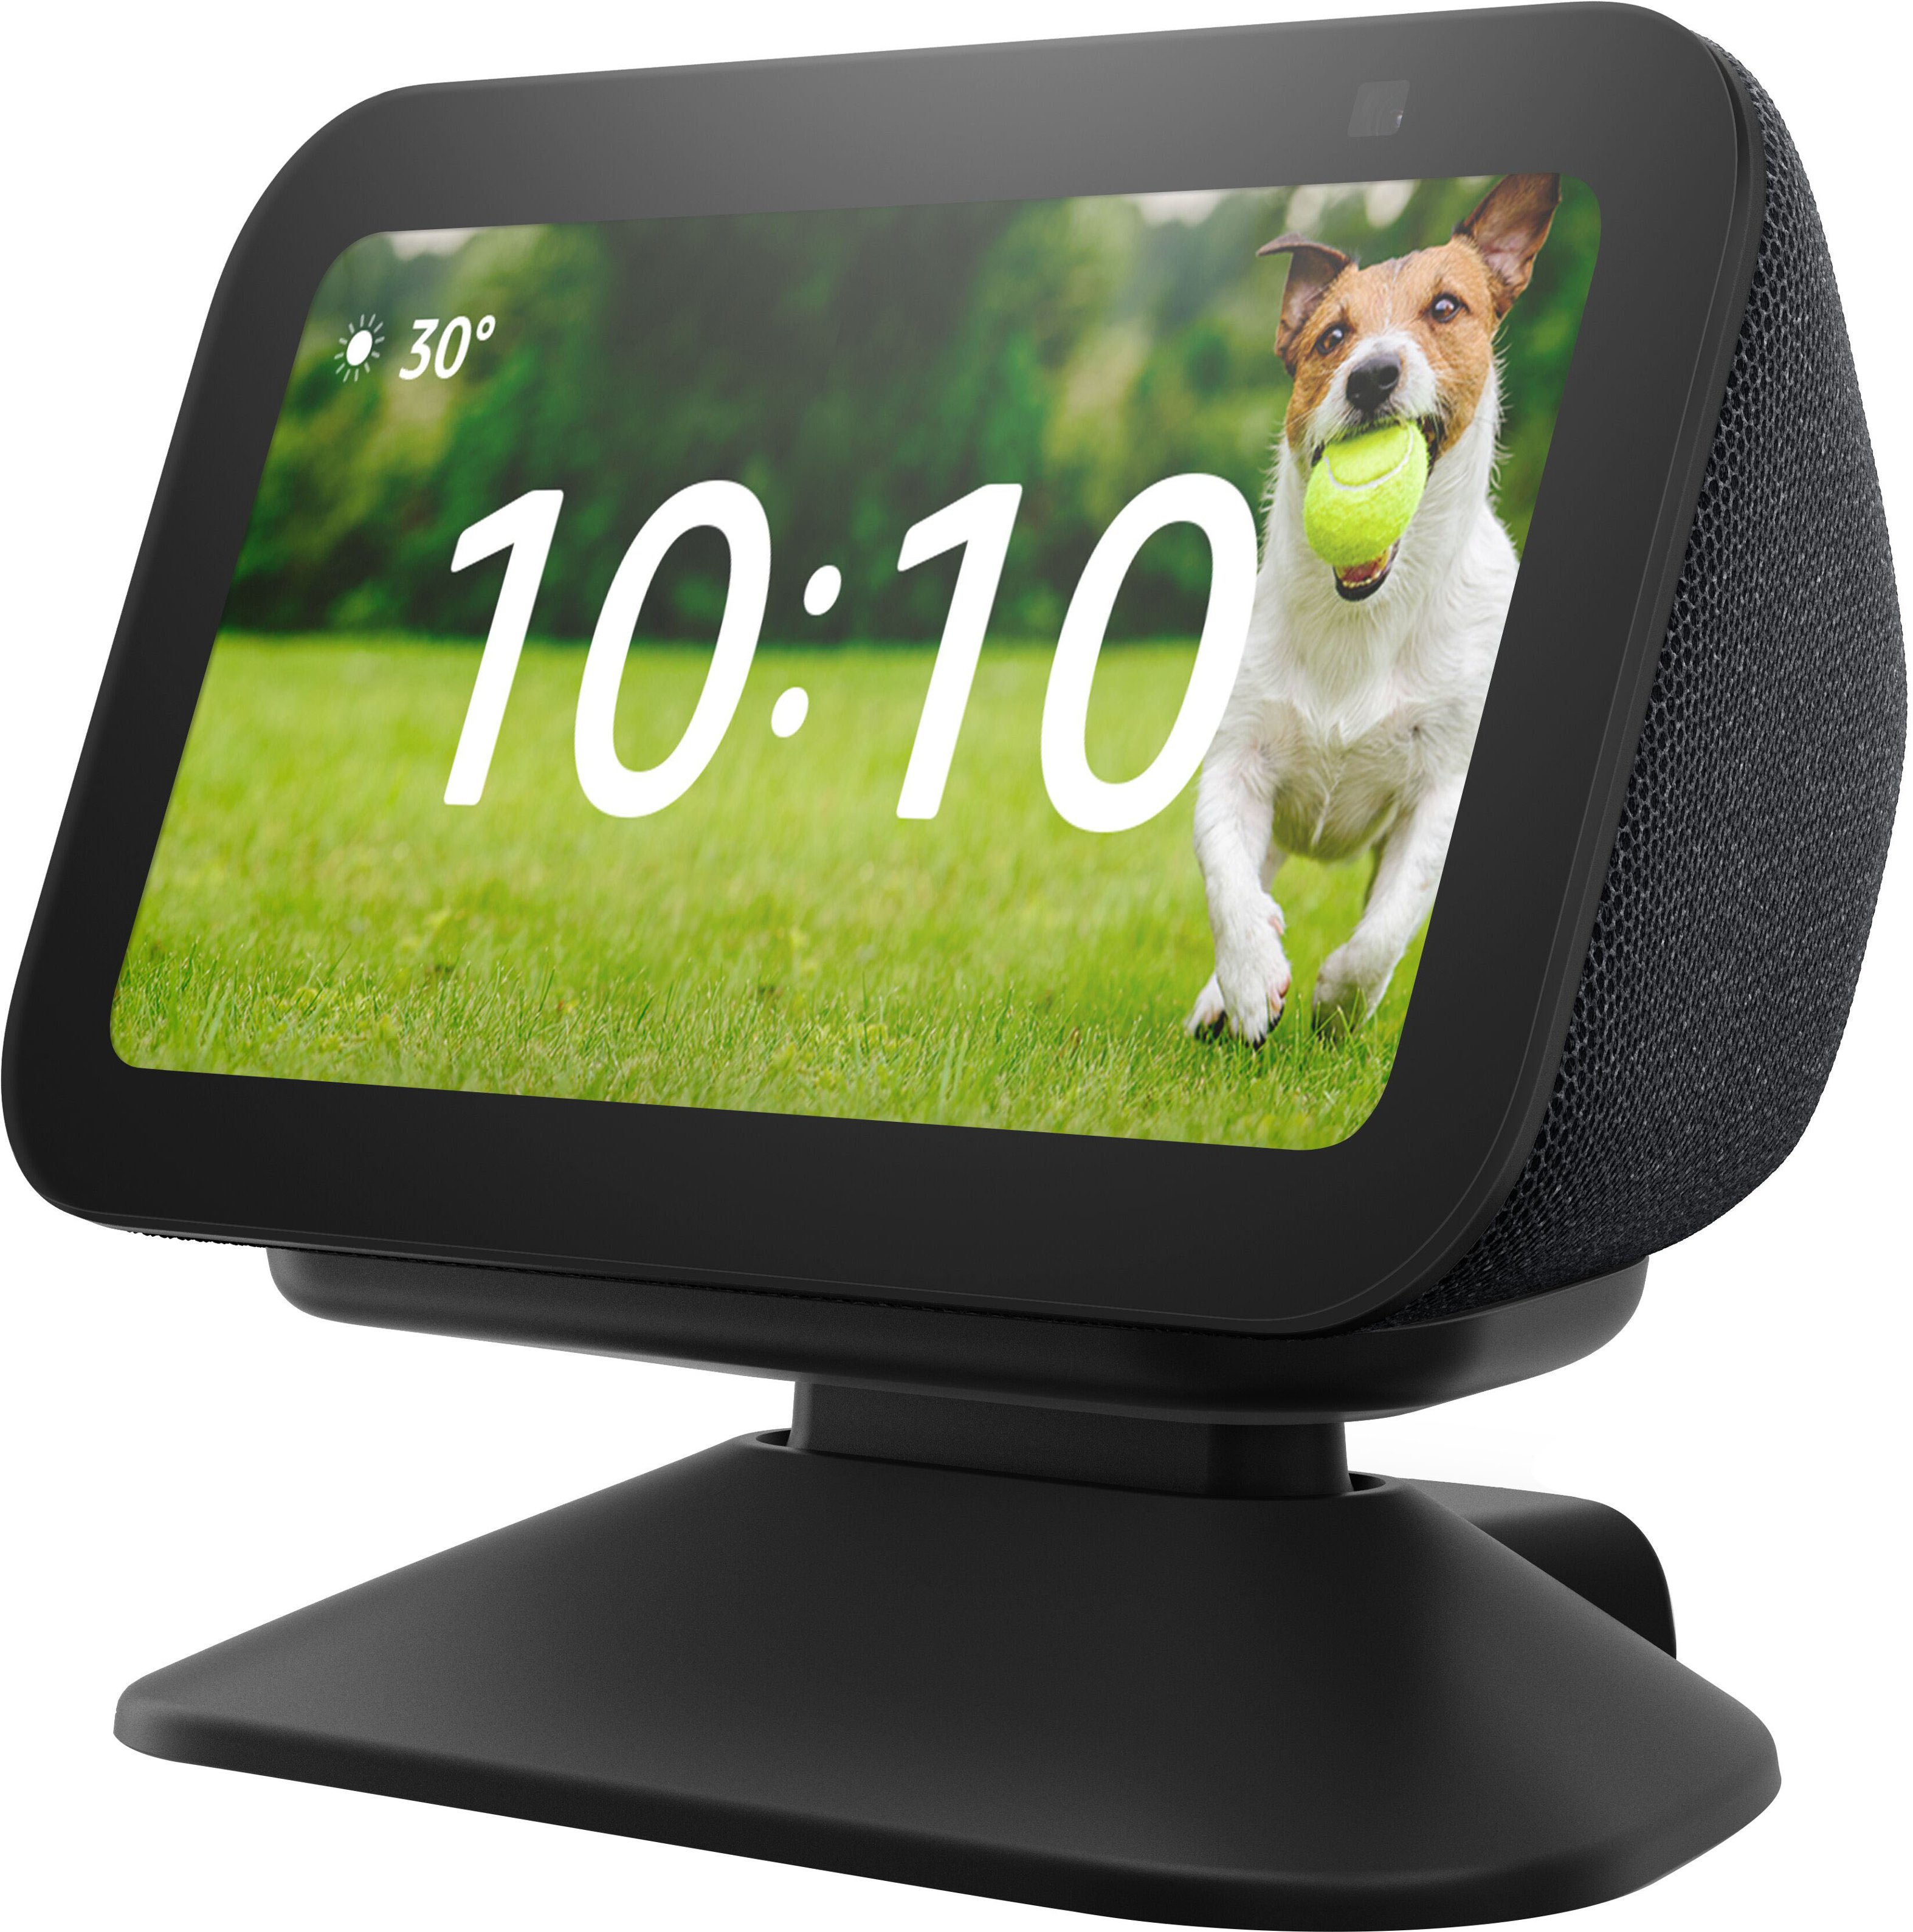 Angle View: Amazon - Echo Show 5 (3rd Gen) Adjustable Stand with USB-C Charging Port - Charcoal